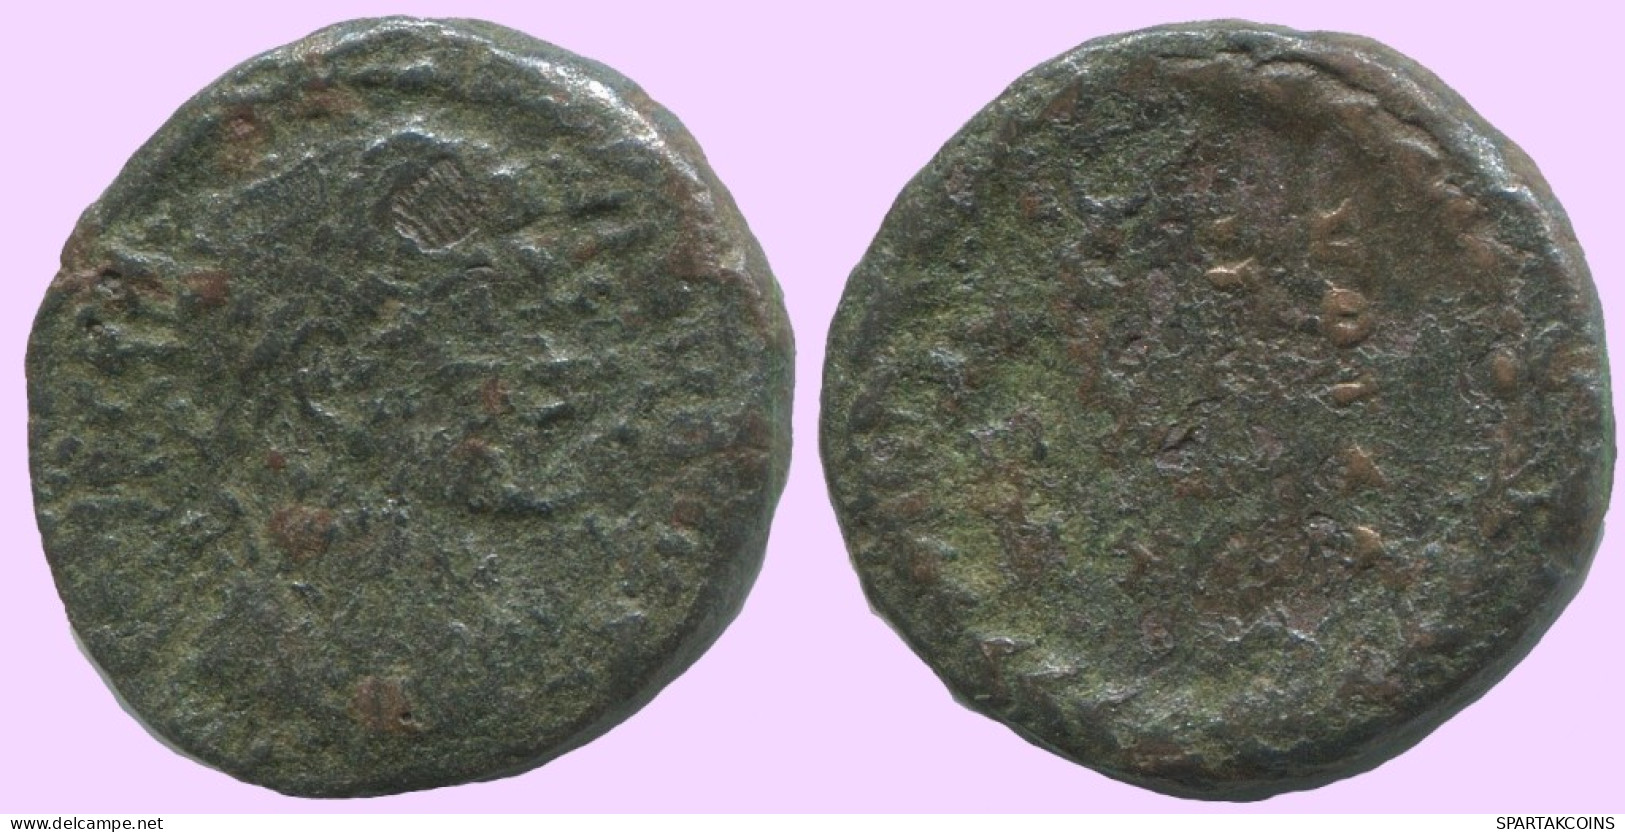 LATE ROMAN EMPIRE Follis Antique Authentique Roman Pièce 3.1g/17mm #ANT2065.7.F.A - The End Of Empire (363 AD To 476 AD)